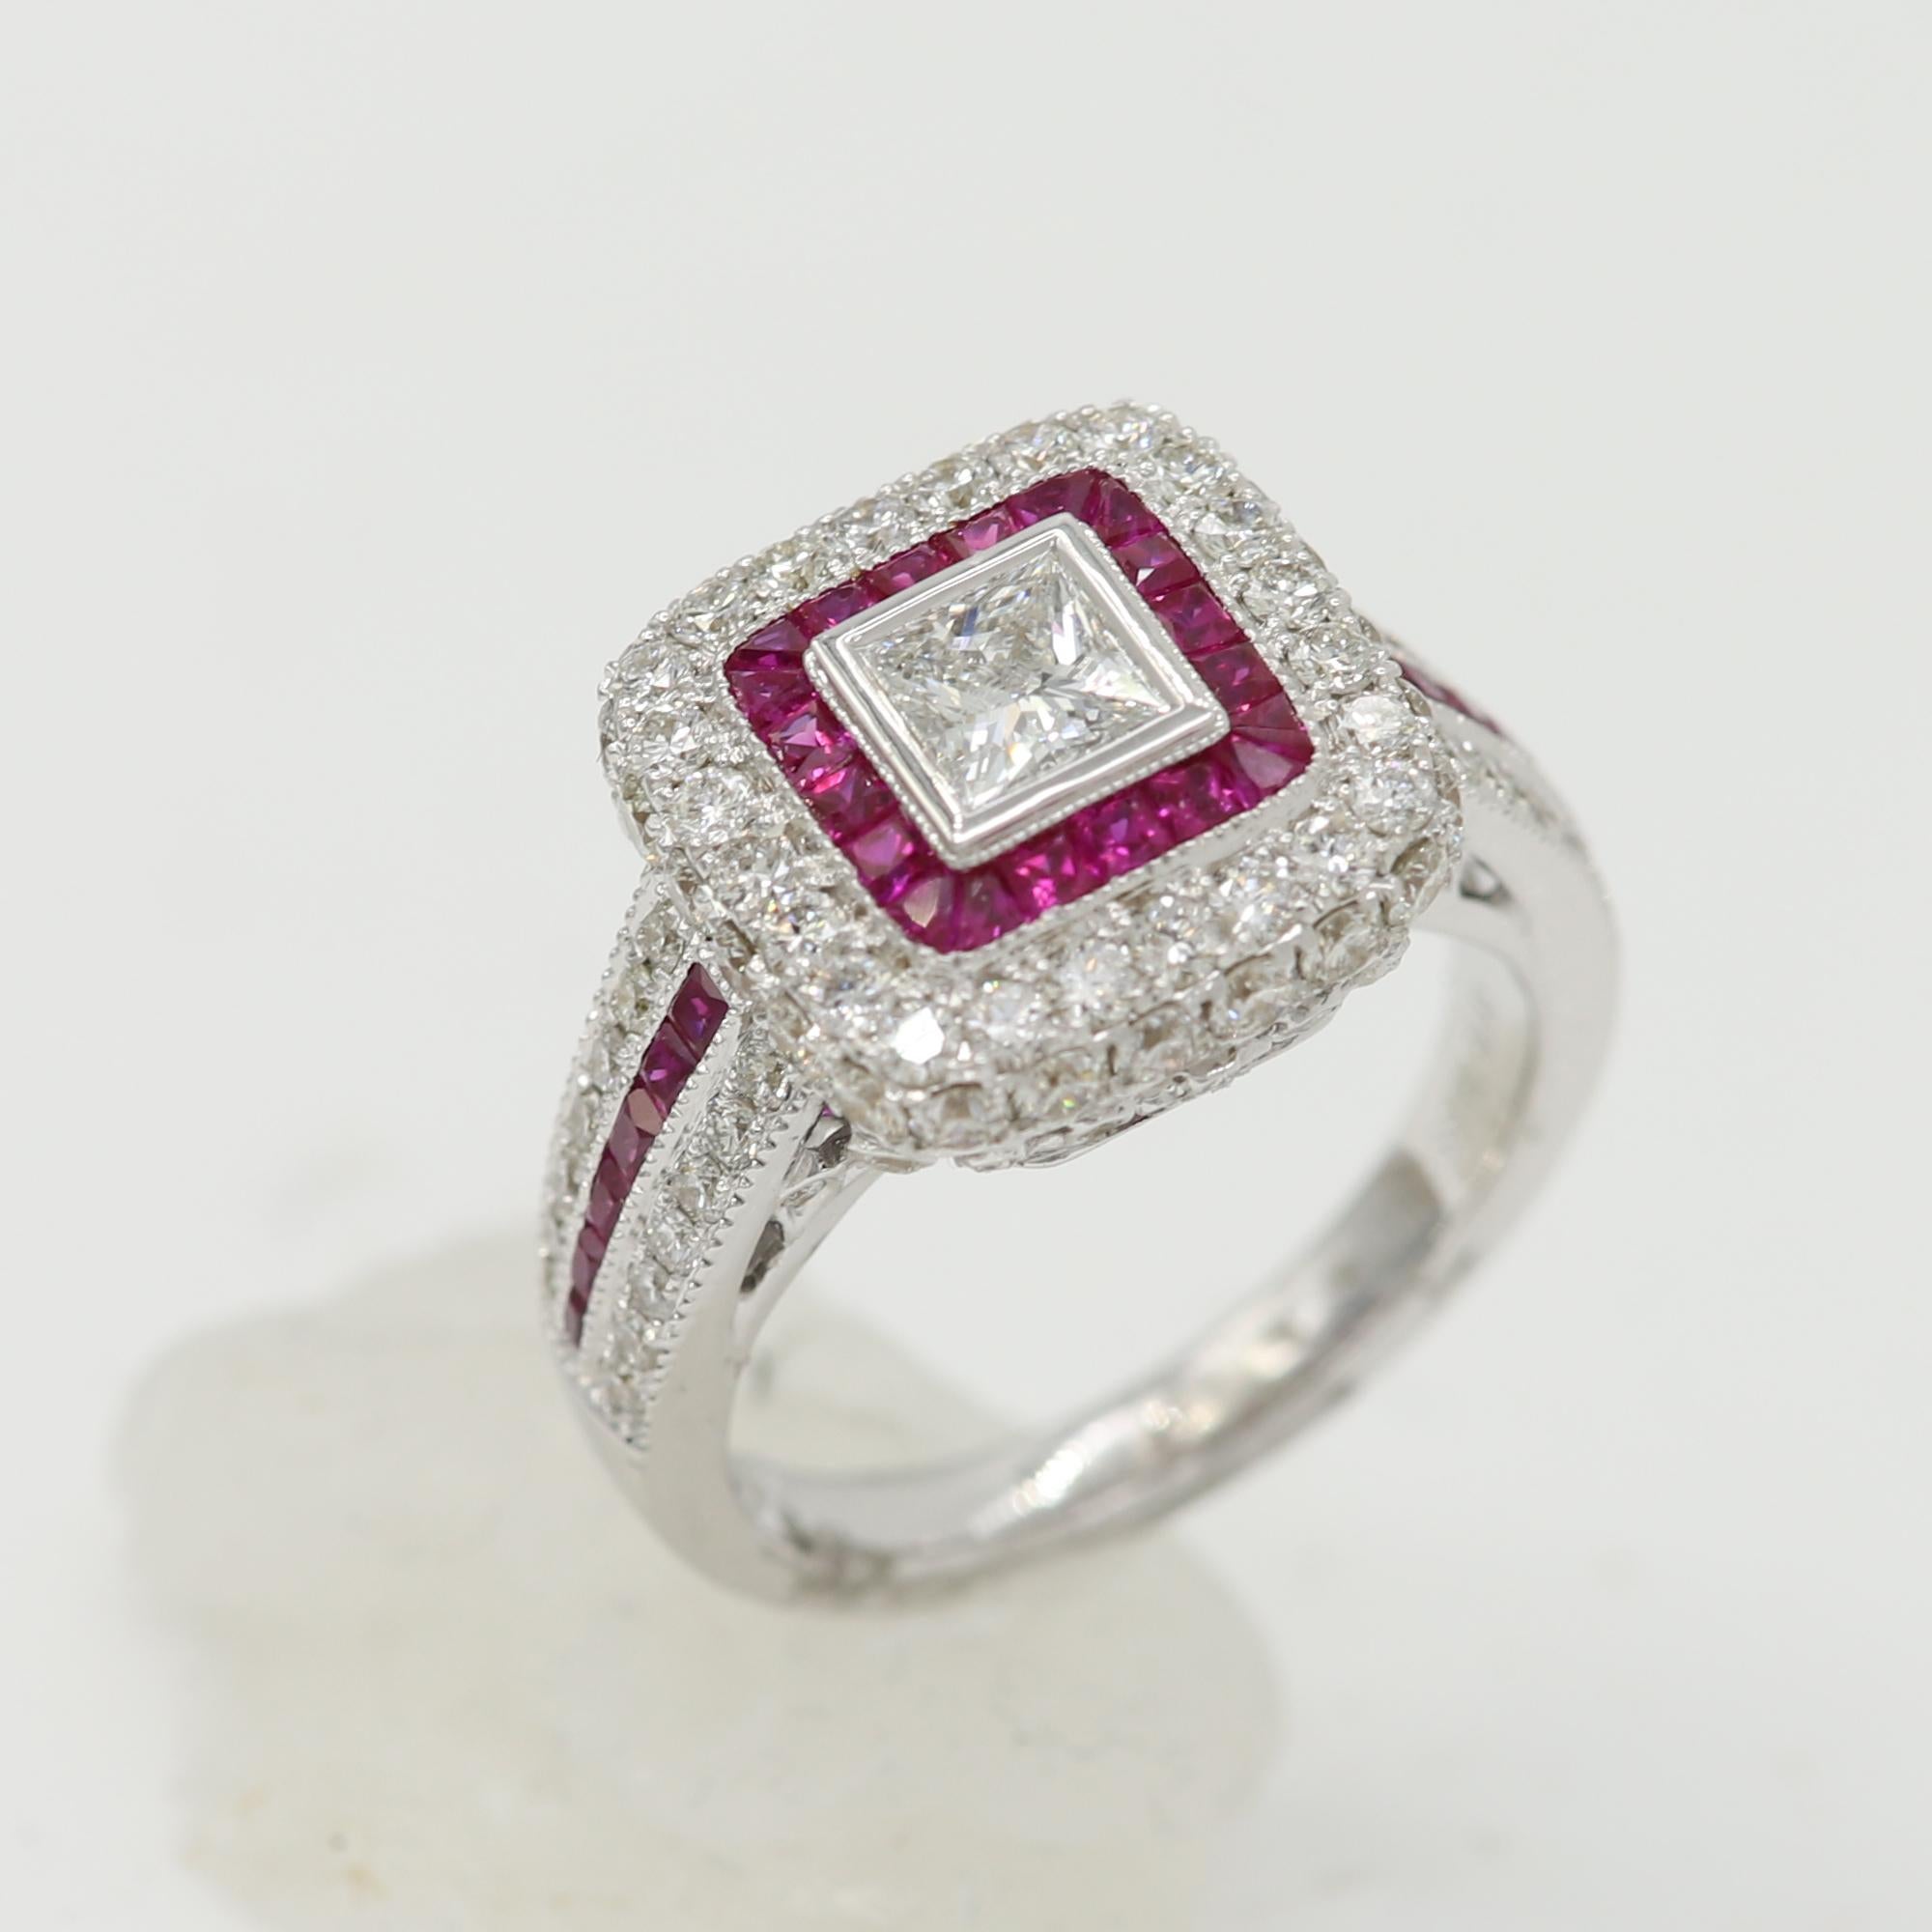 Brilliant Art Deco Style Ring. 18k White Gold 10.10 grams. Total all Diamonds 2.14 carat (center stones is princess cut Diamond 0.52 carat) Ruby total 0.83 carat. overall design area size on the top is 13 x 13 mm. Finger size 7.
diamonds are GH-SI